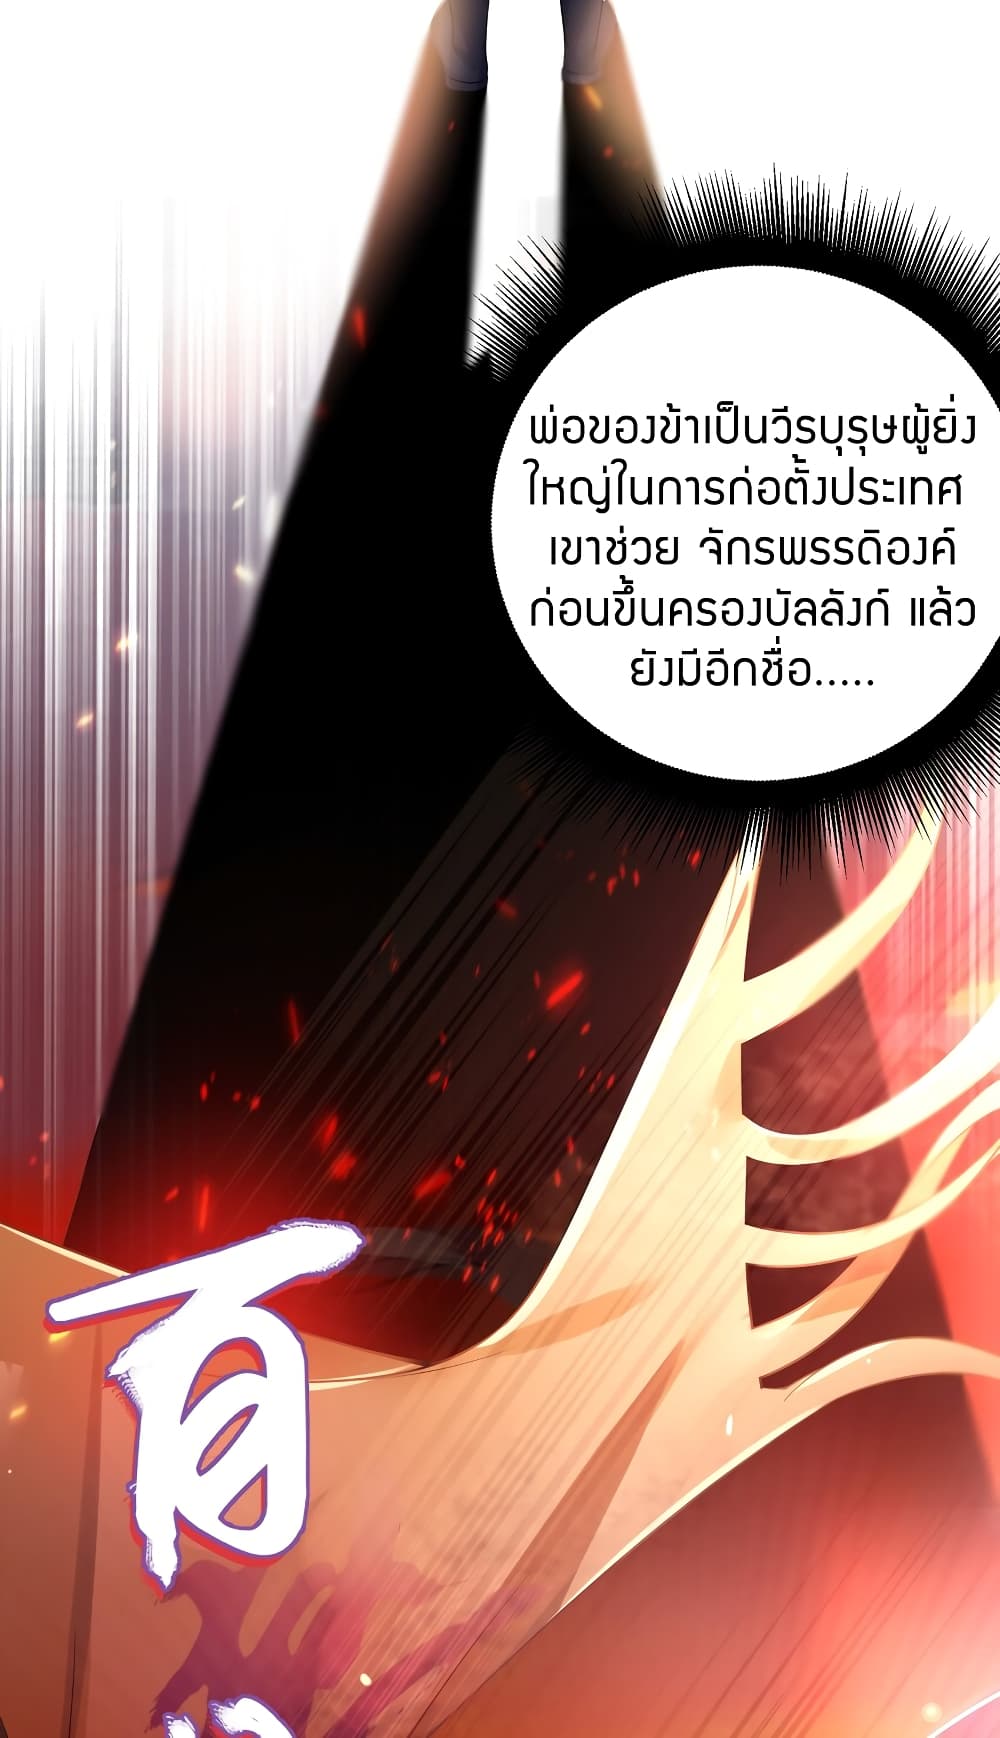 The Lady Is the Future Tyrant 1 แปลไทย